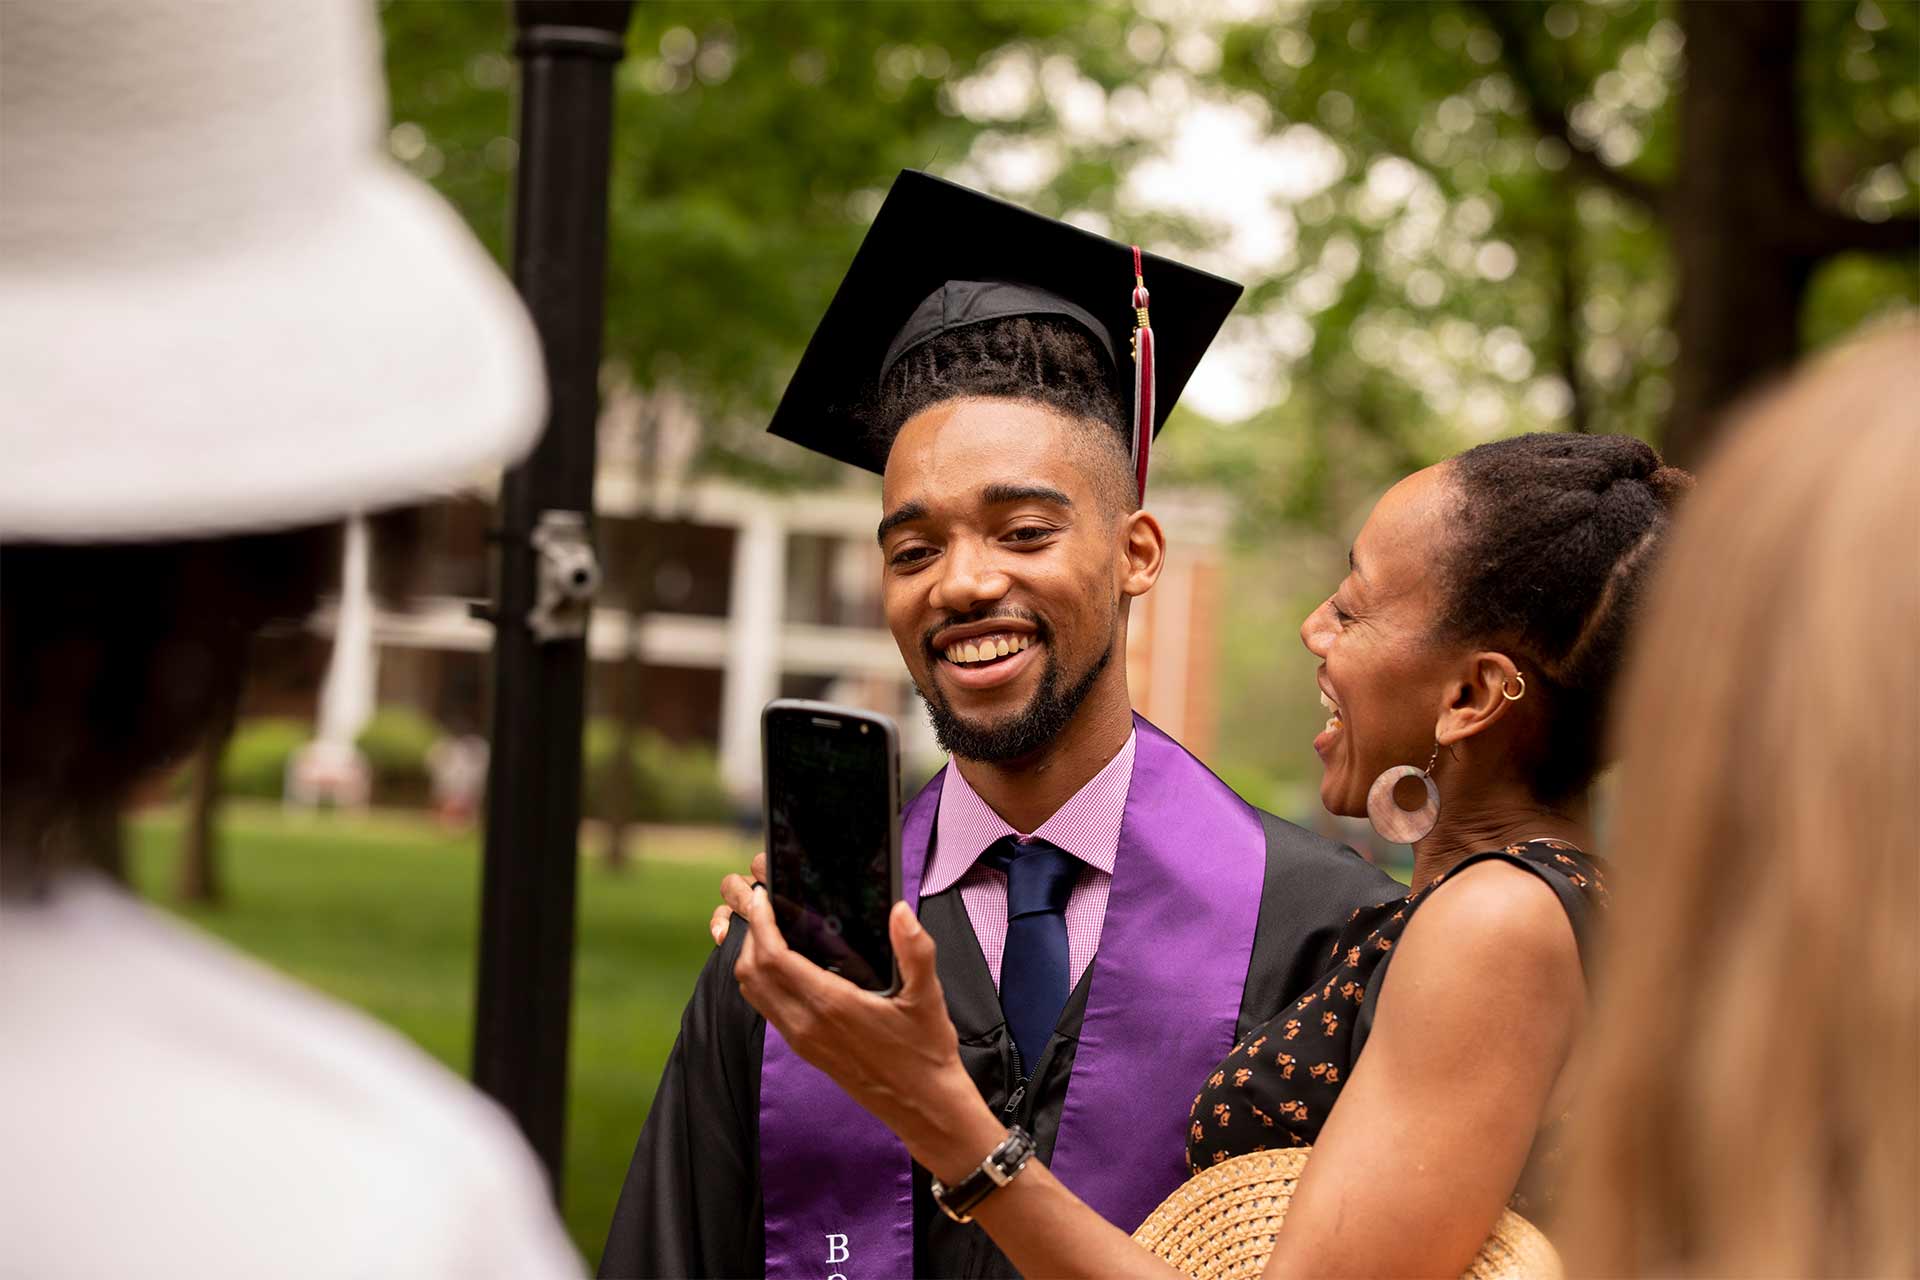 A friend shows a student a phone photo after Commencement.